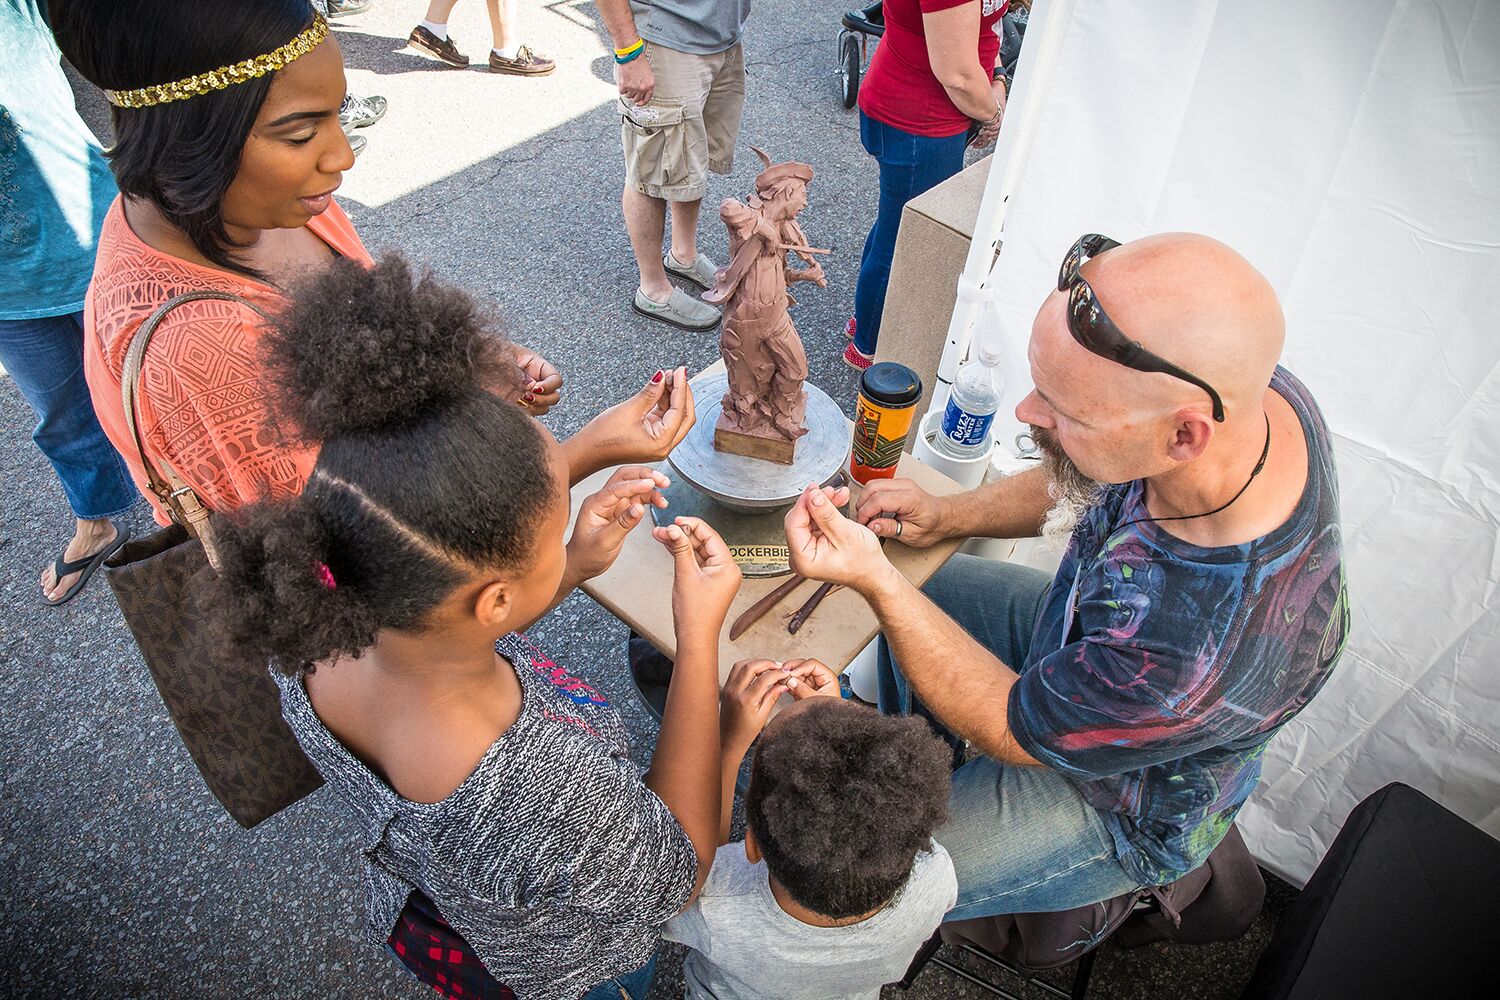 A family interacts with an artist while he creates a small statue out of clay